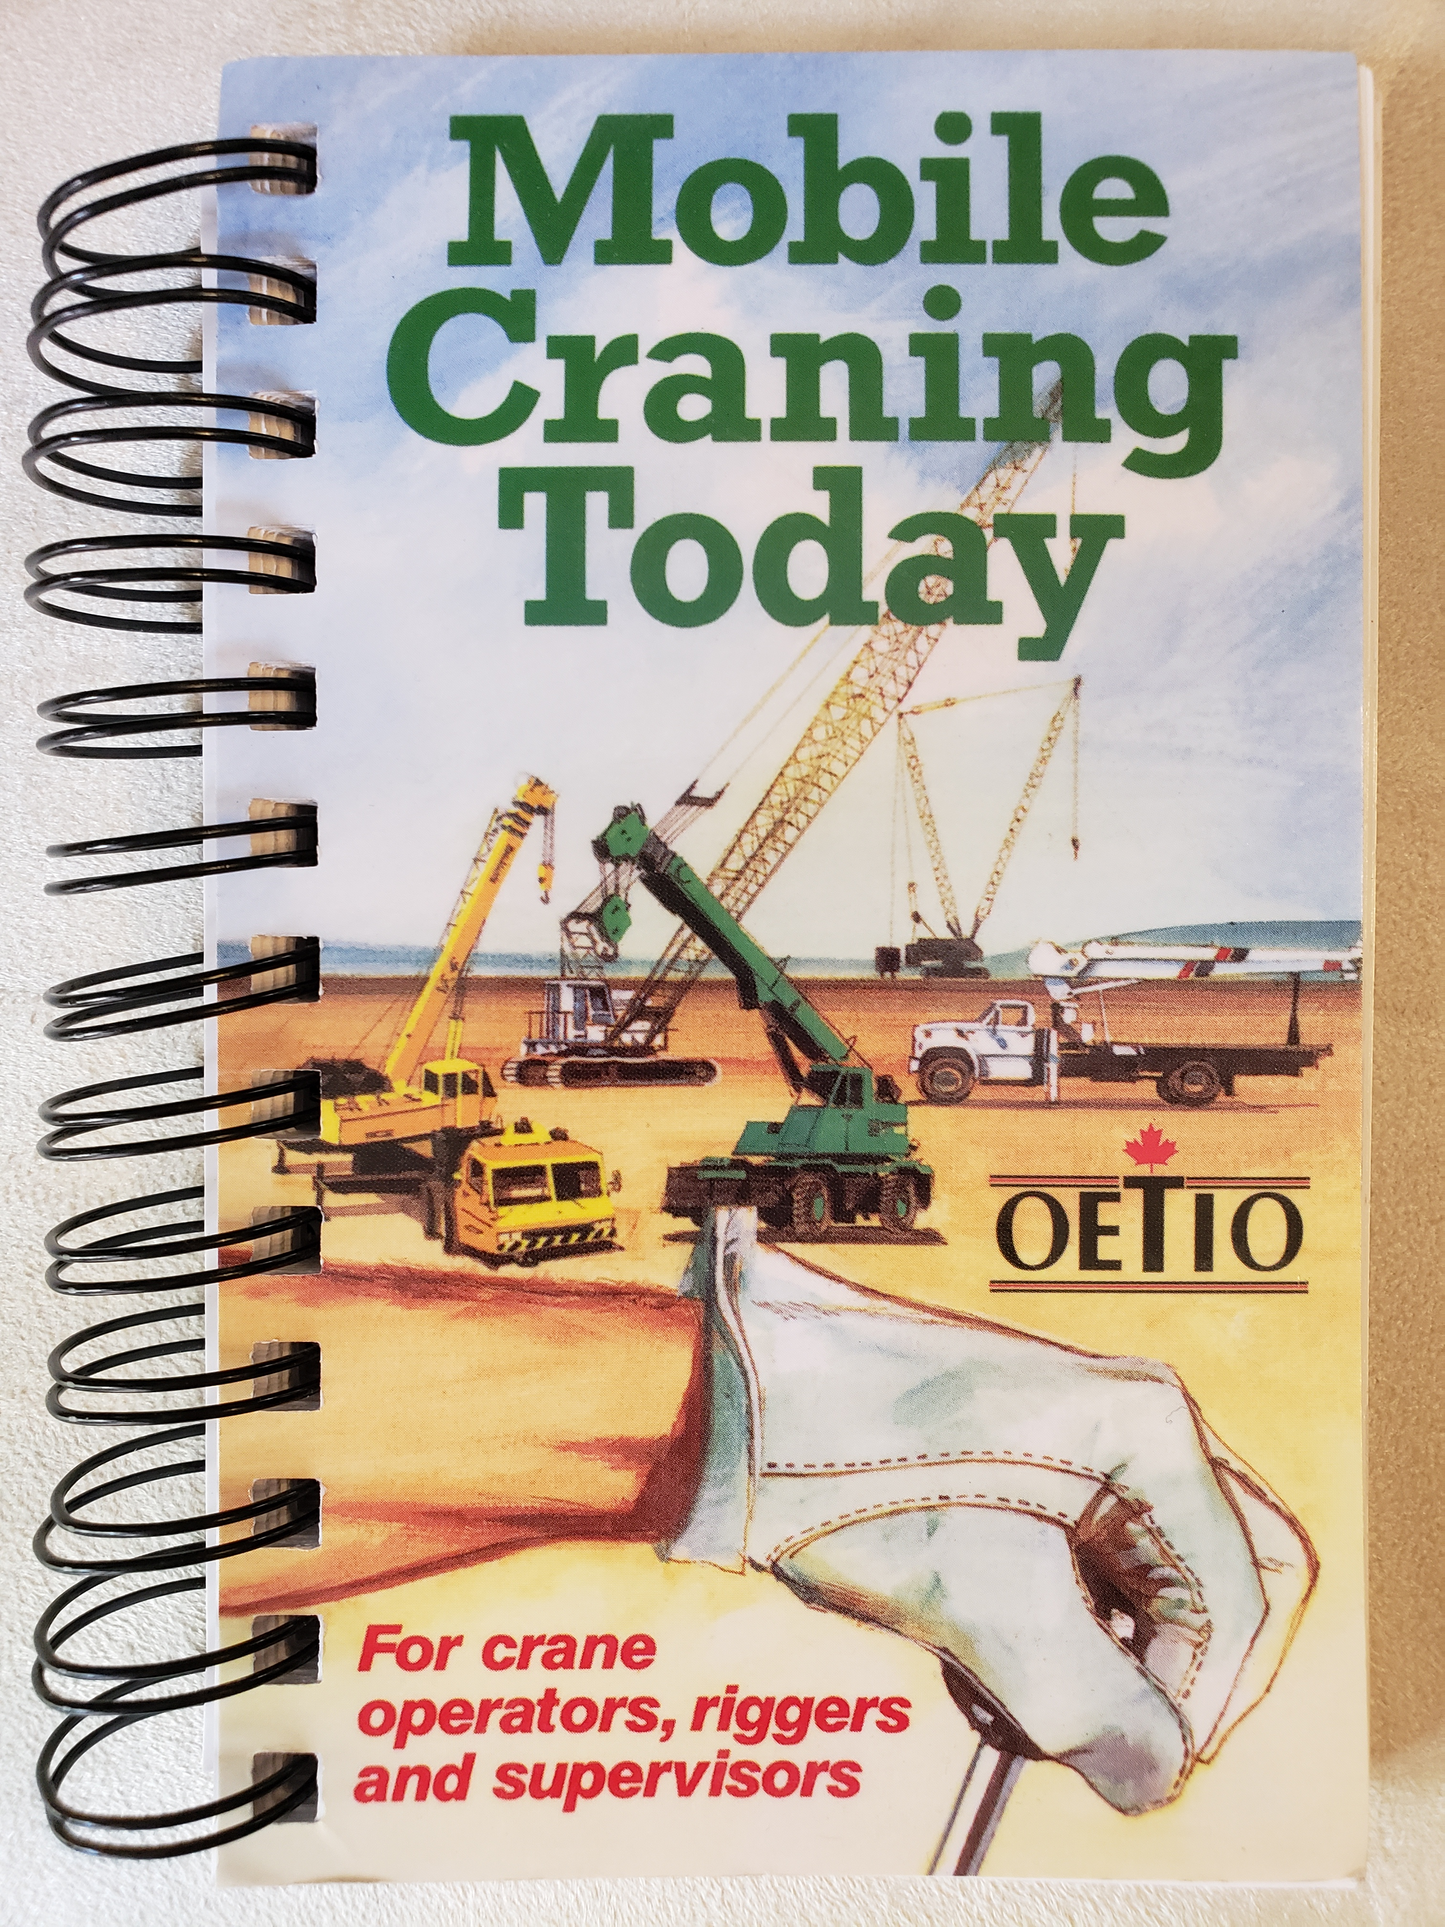 Mobile Craning Today for crane operators riggers and supervisors by OETIO